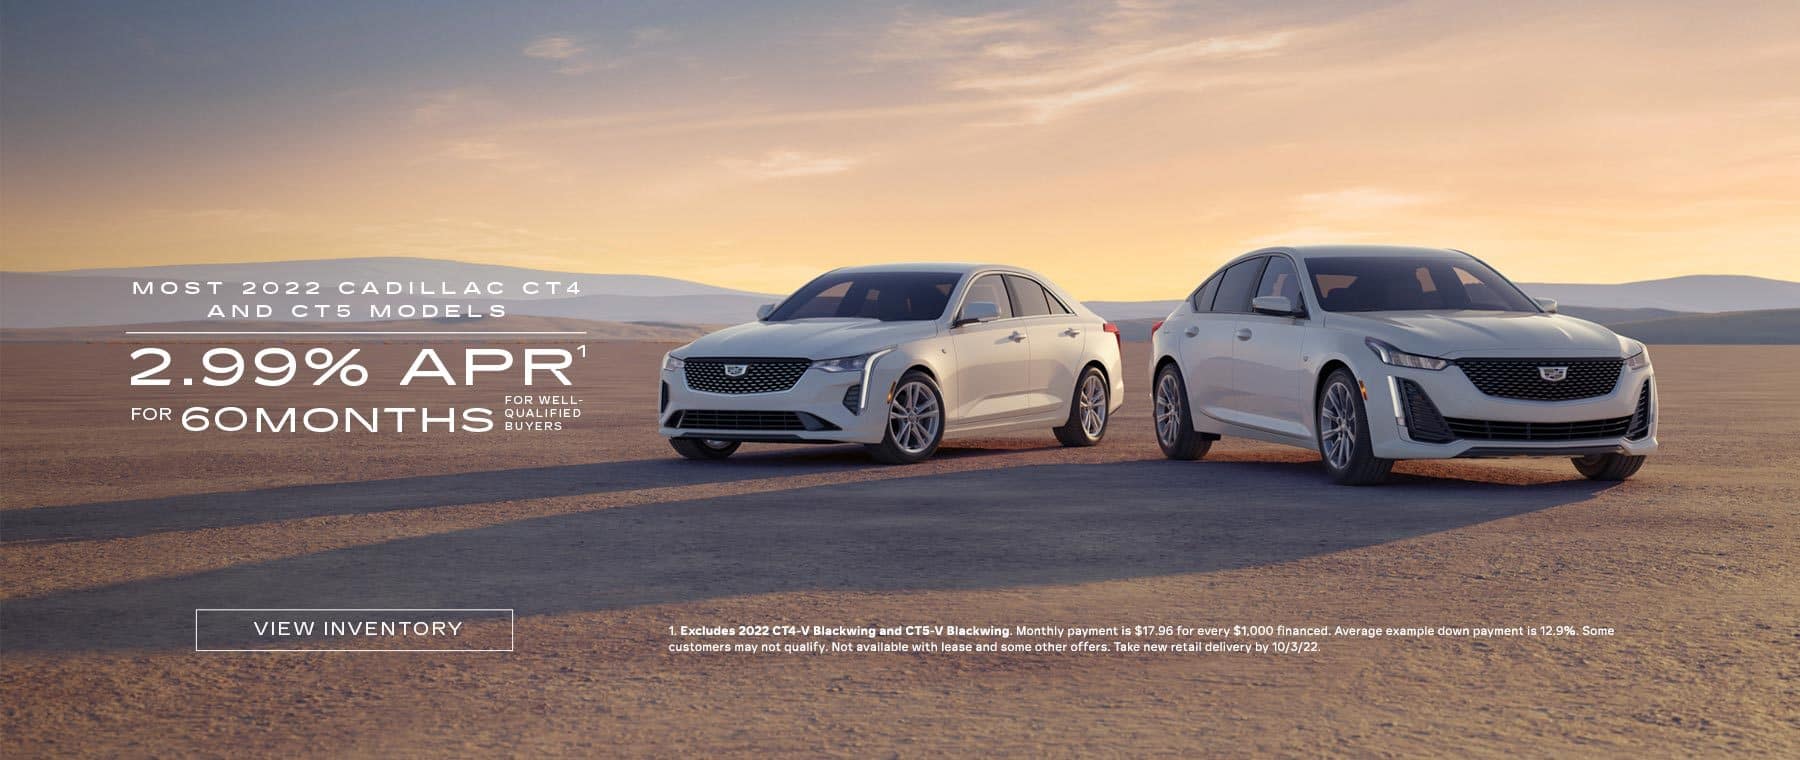 2022 Cadillac CT4 and CT5. 2.99% for 60 months for well-qualified buyers.